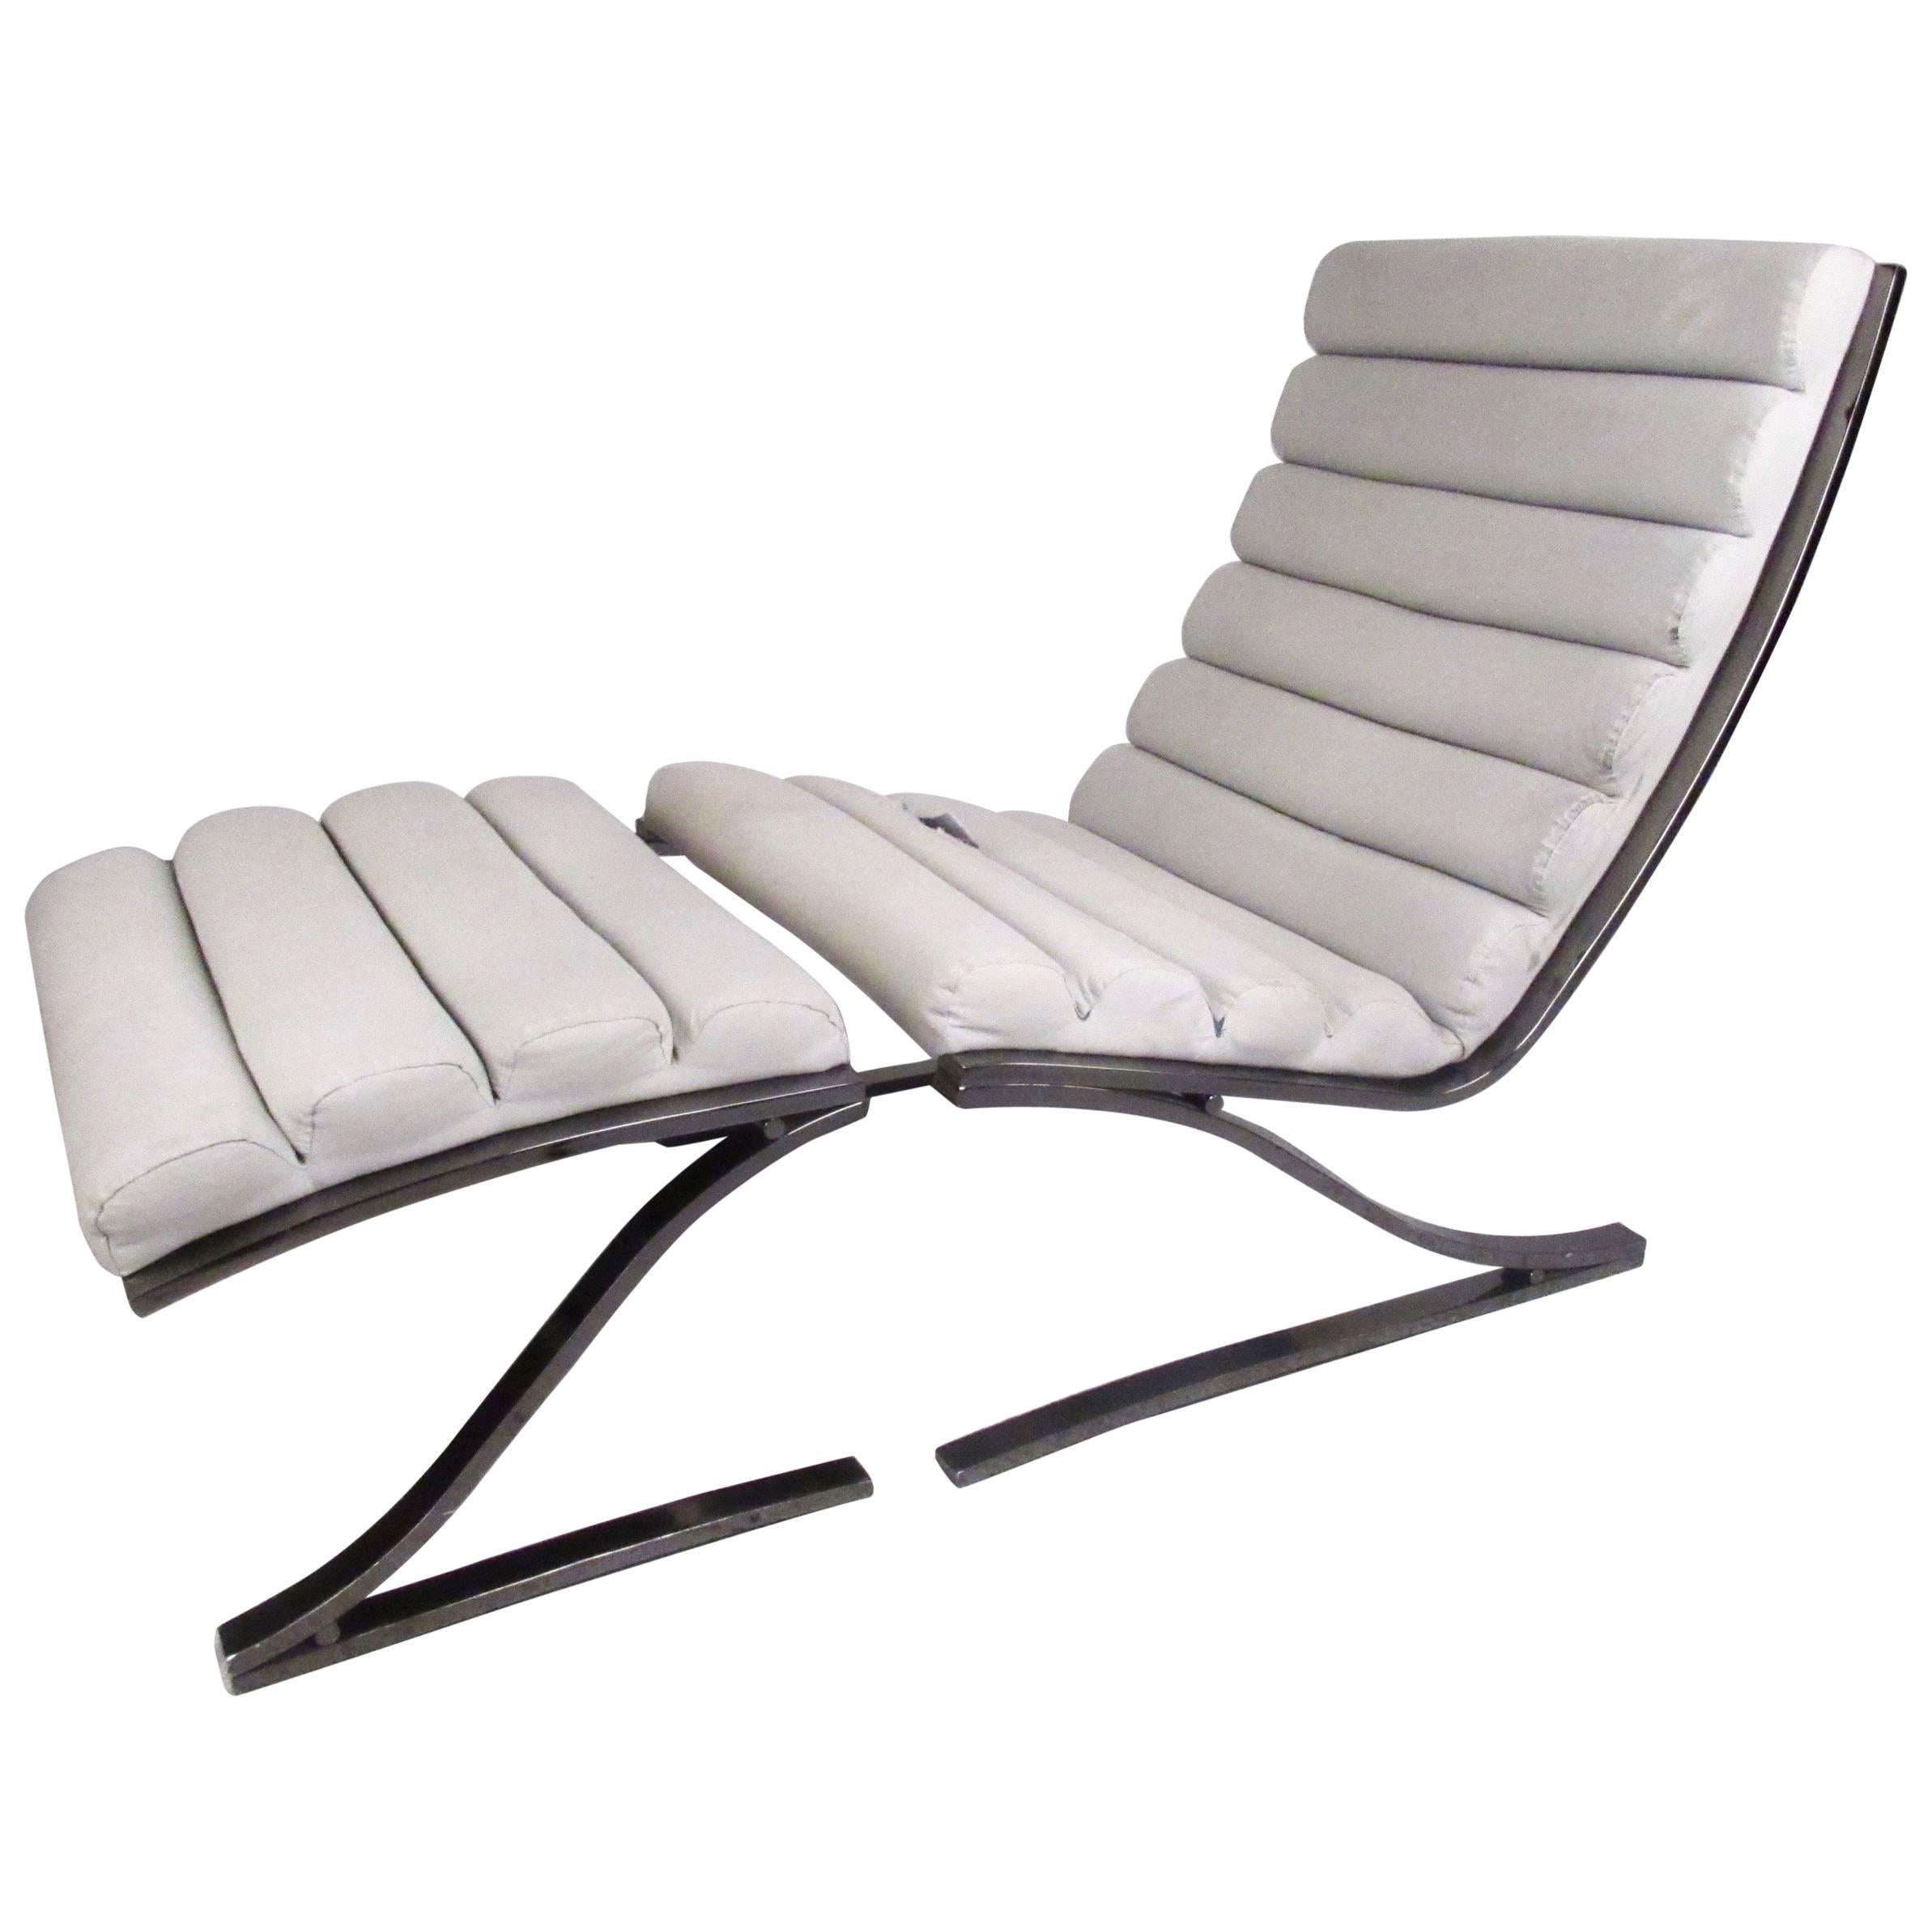  Lounge Chair with Ottoman by Design Institute of America